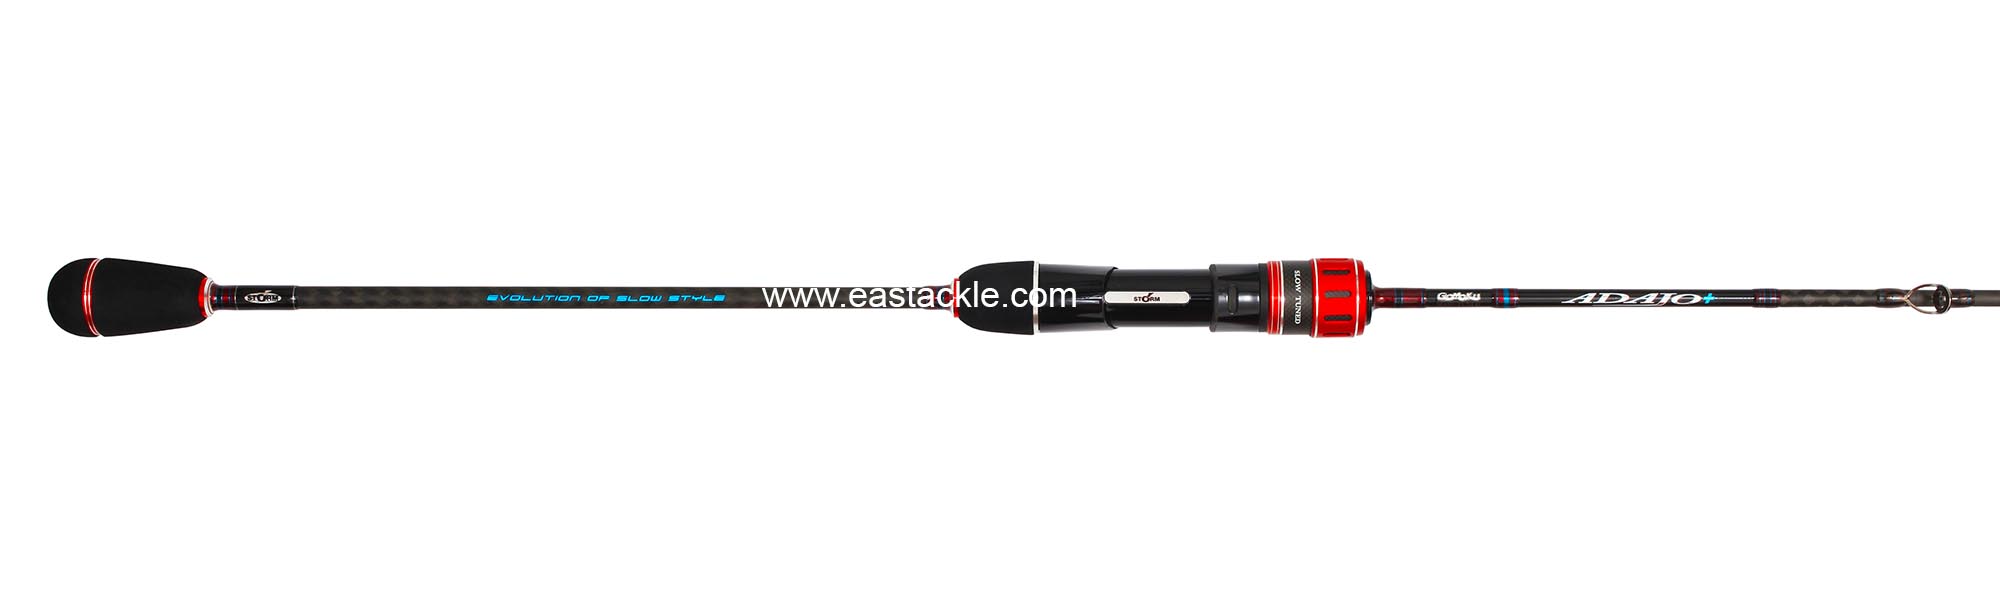 Storm - Adajo+ - AJP631-2 - Slow Jigging Fishing Rod - Butt to Stripper Guide (Top View) | Eastackle